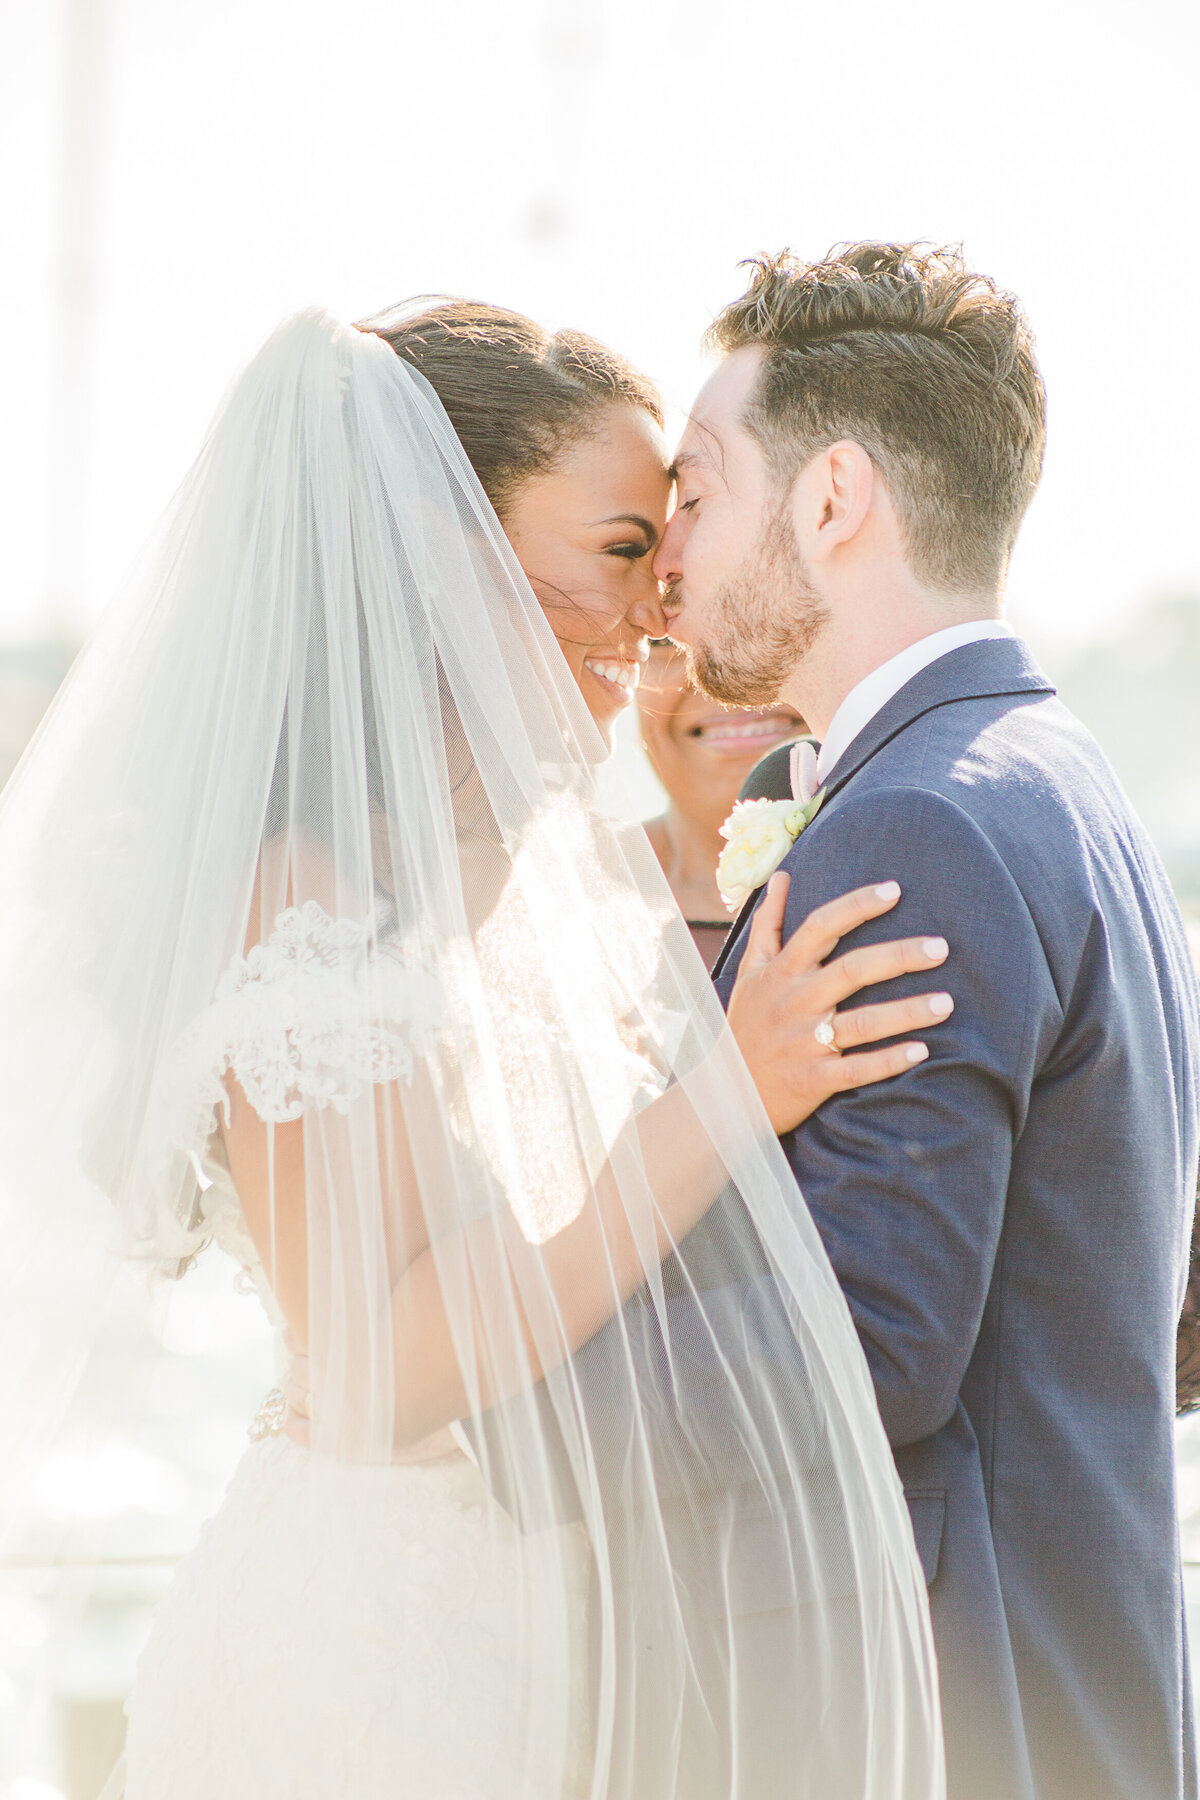 Close up image. A bride and groom are captured at The Bohlin in Newport, RI for candid wedding portraits. The bride and groom are in an embrace and the groom is kissing the bride's nose. Captured by Rhode Island Wedding Photographer Lia Rose Weddings